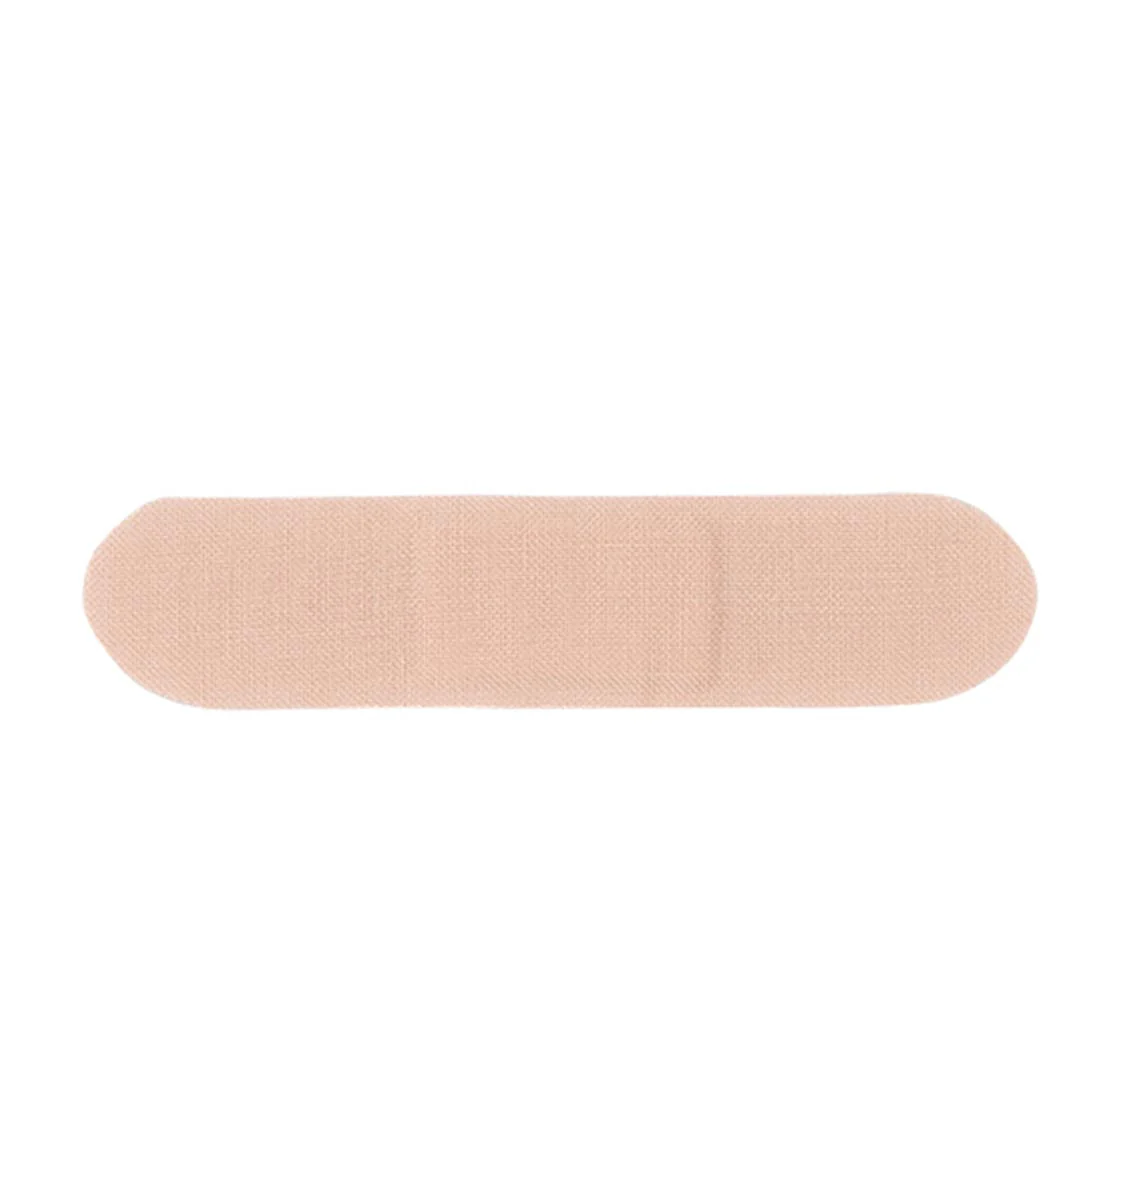 Patch - Natural Bamboo Bandages